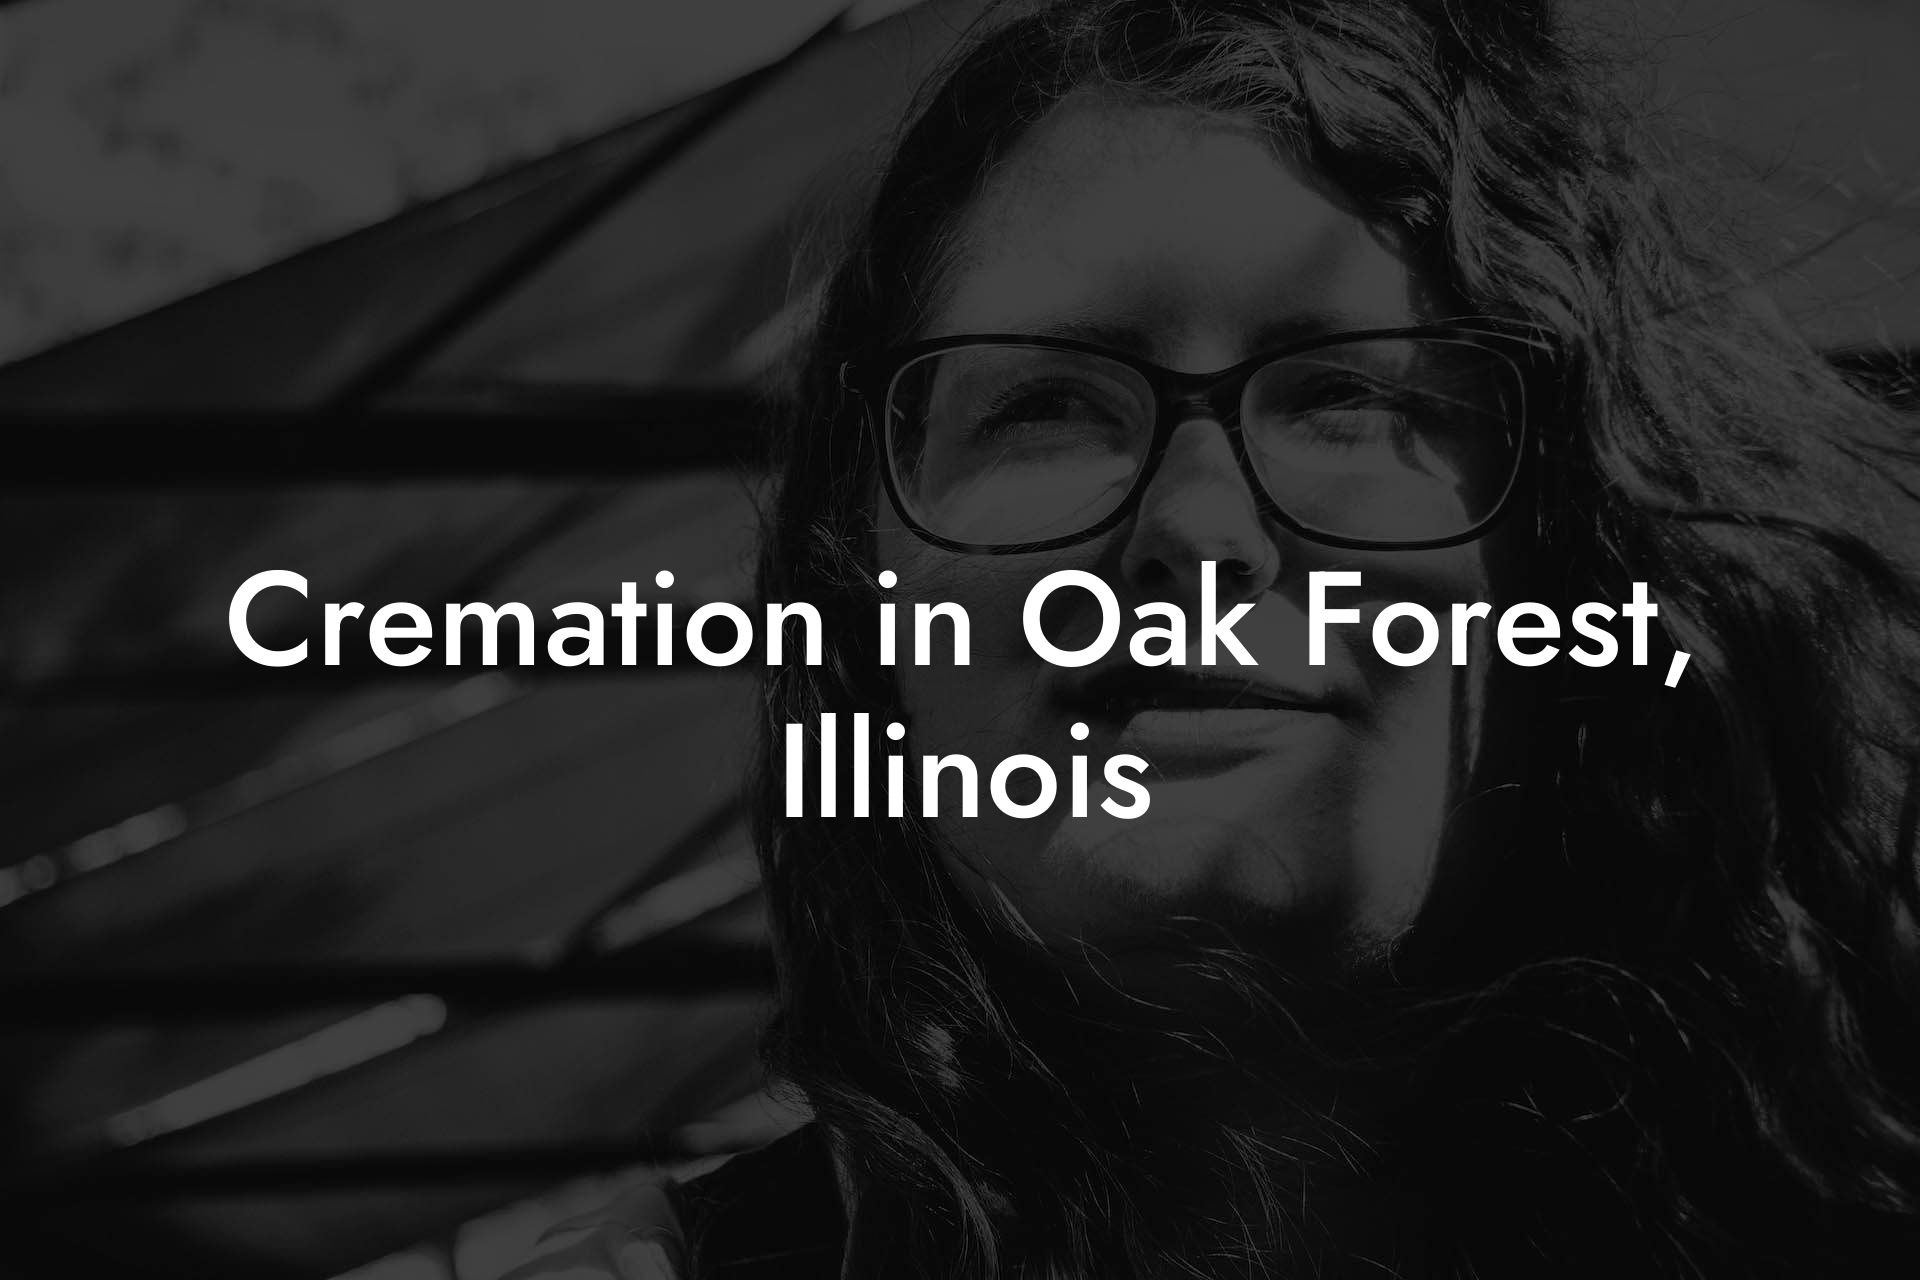 Cremation in Oak Forest, Illinois